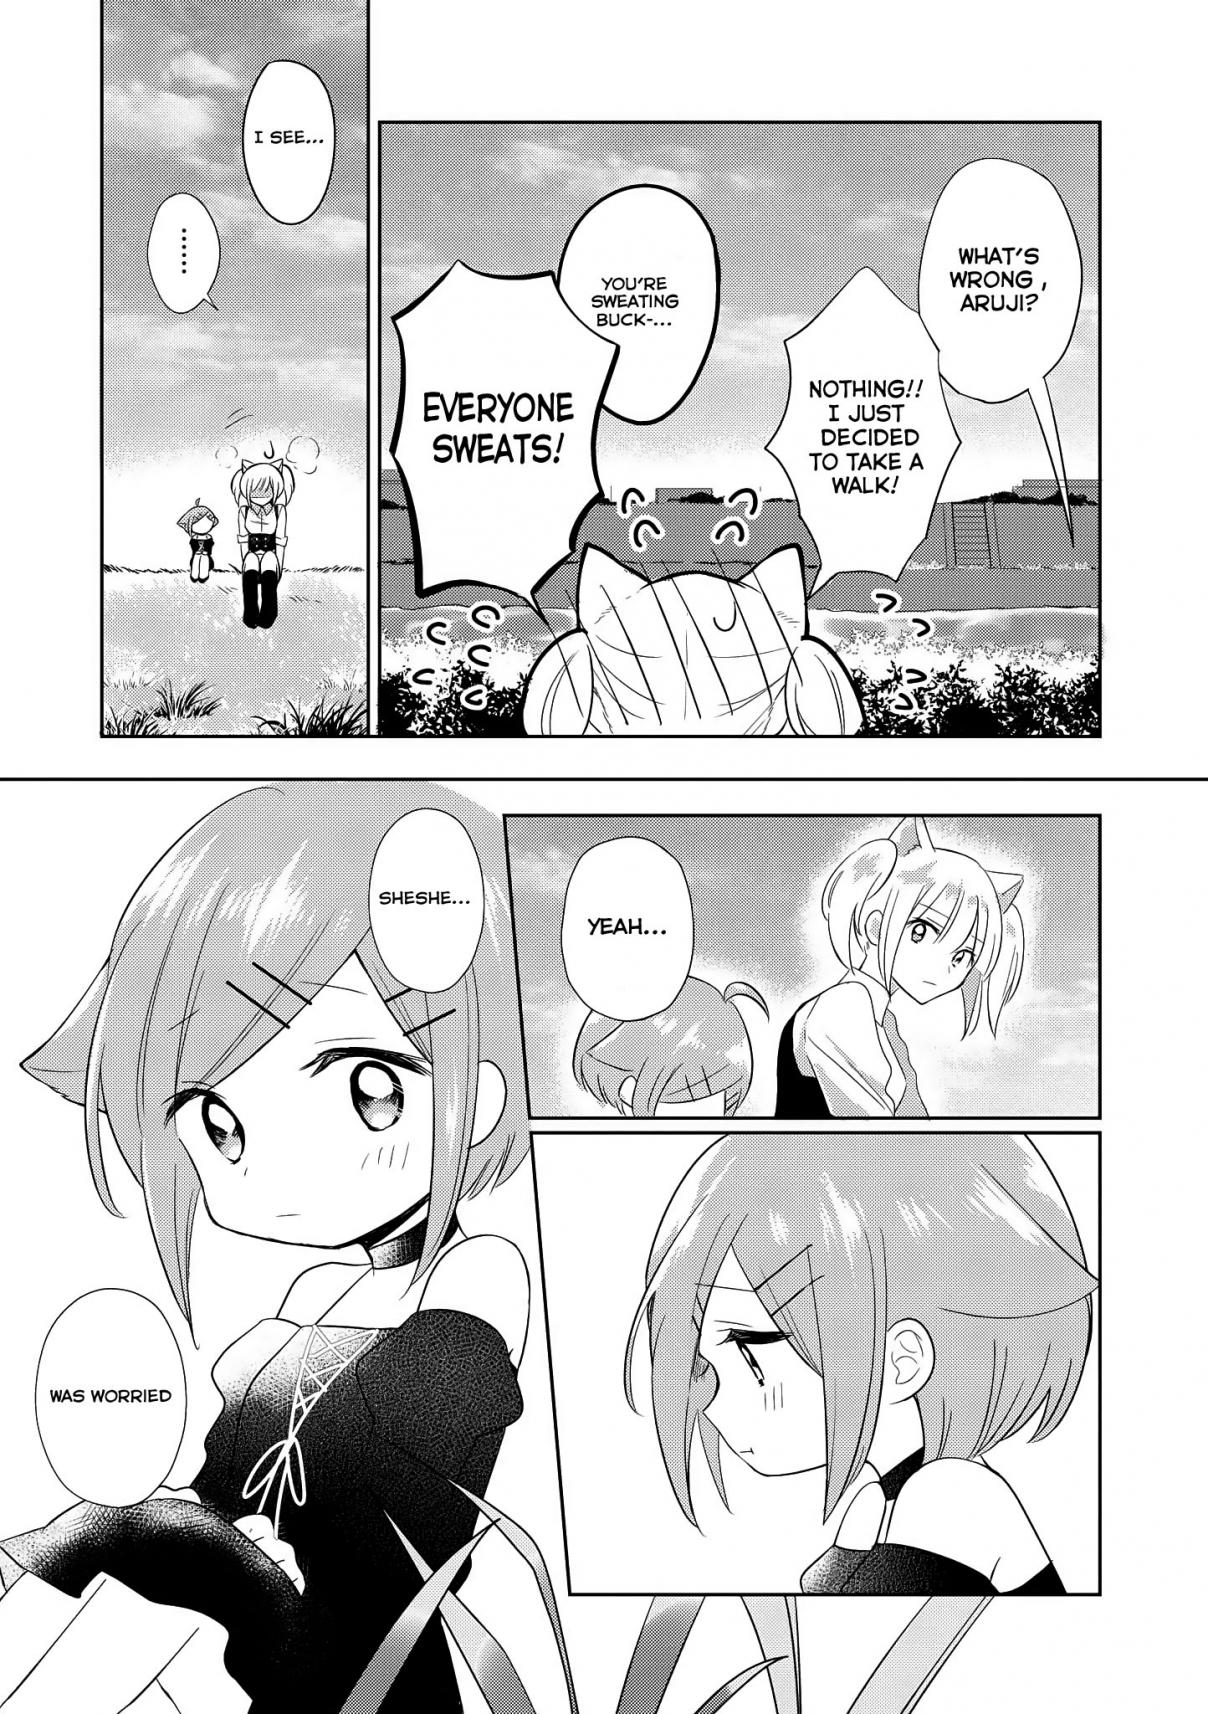 Isekai Tensei Yuri Anthology Vol. 1 Ch. 8 Starting as a Cat in Another World